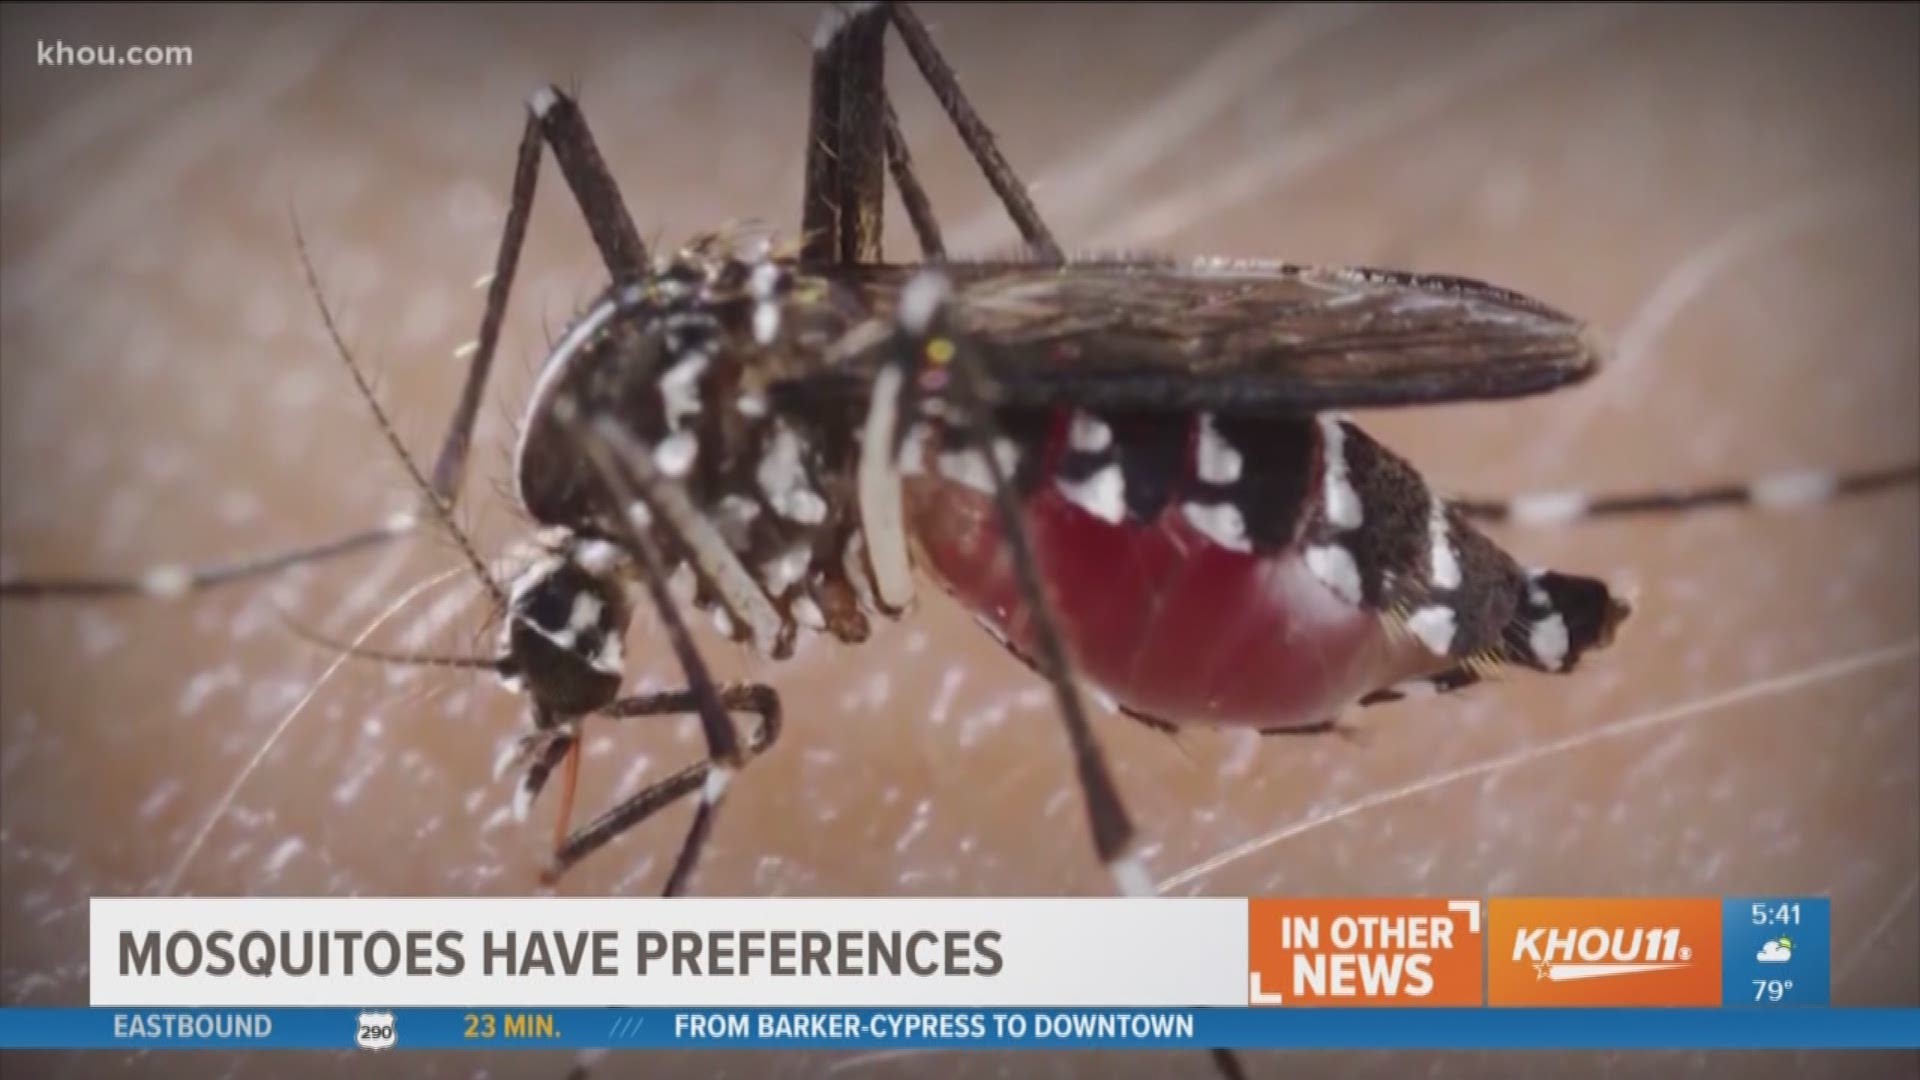 Mosquitoes have preferences